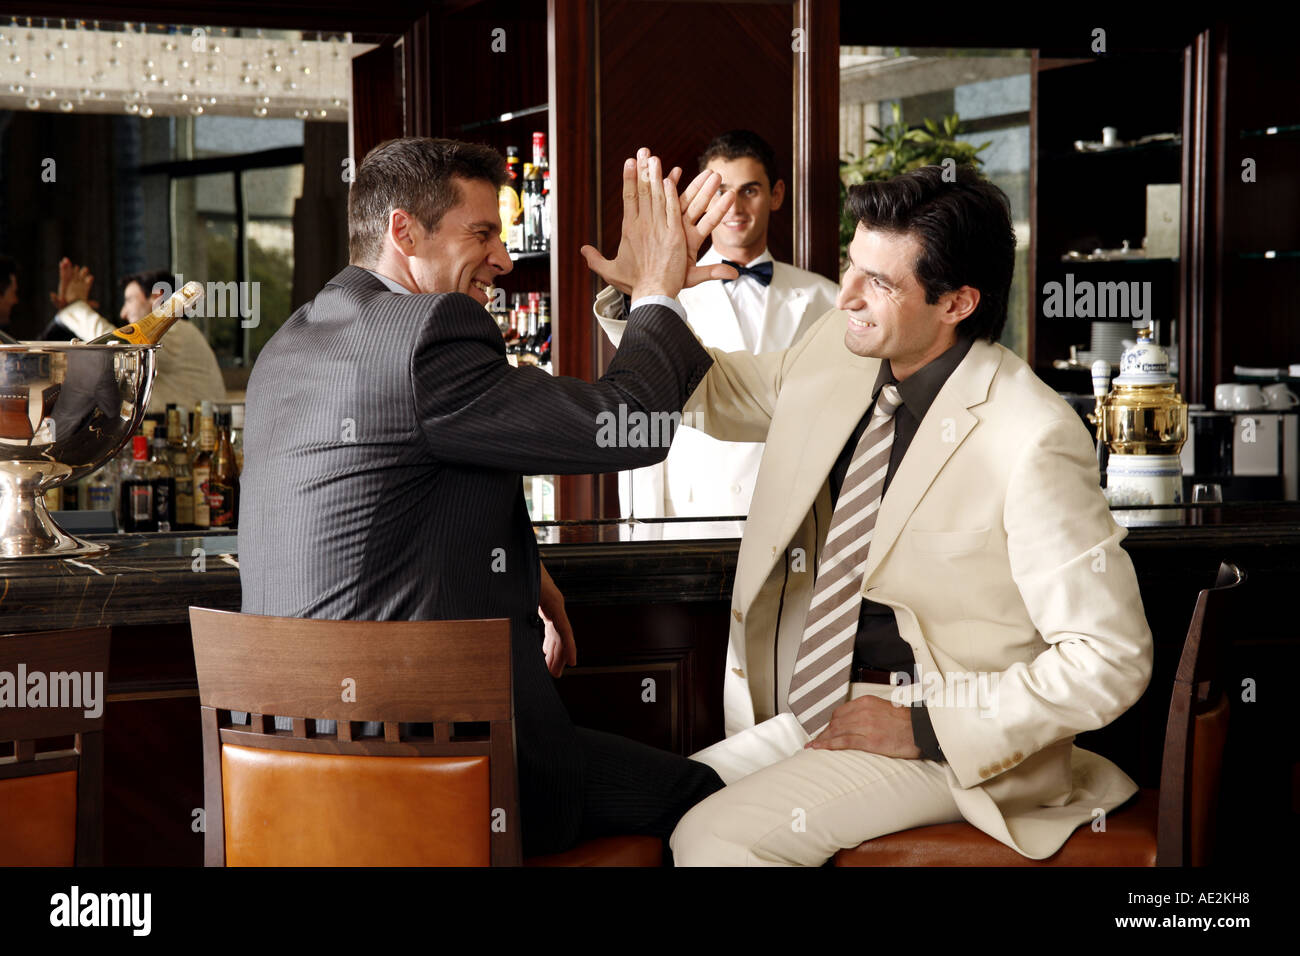 Two men slapping hands in agreement at a bar Stock Photo